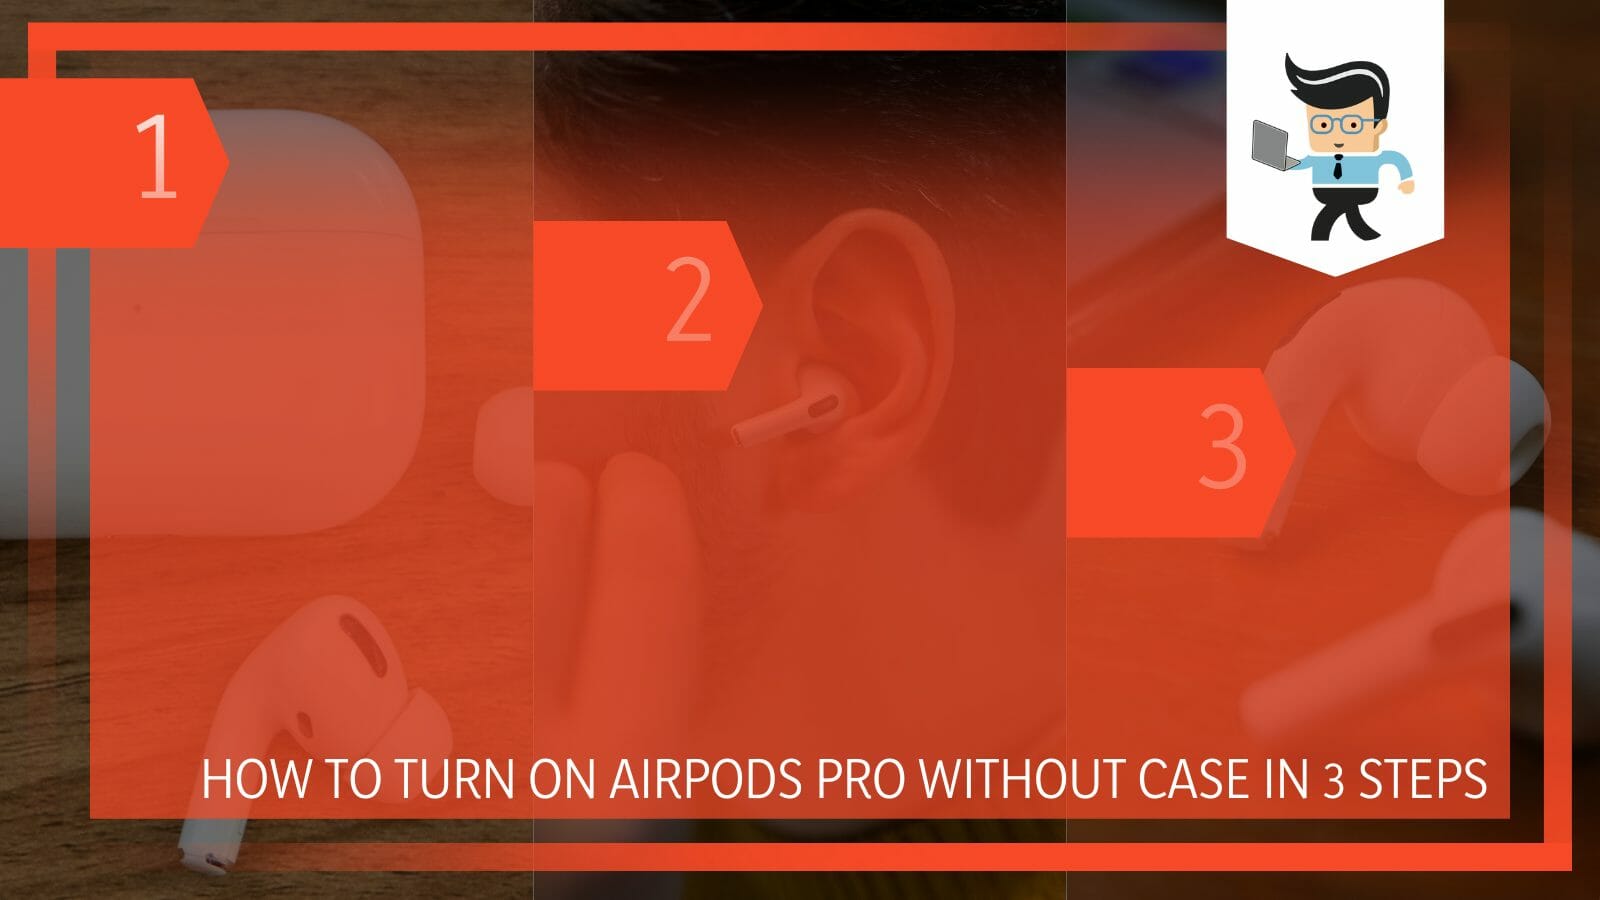 Turn on AirPods Pro Without Case